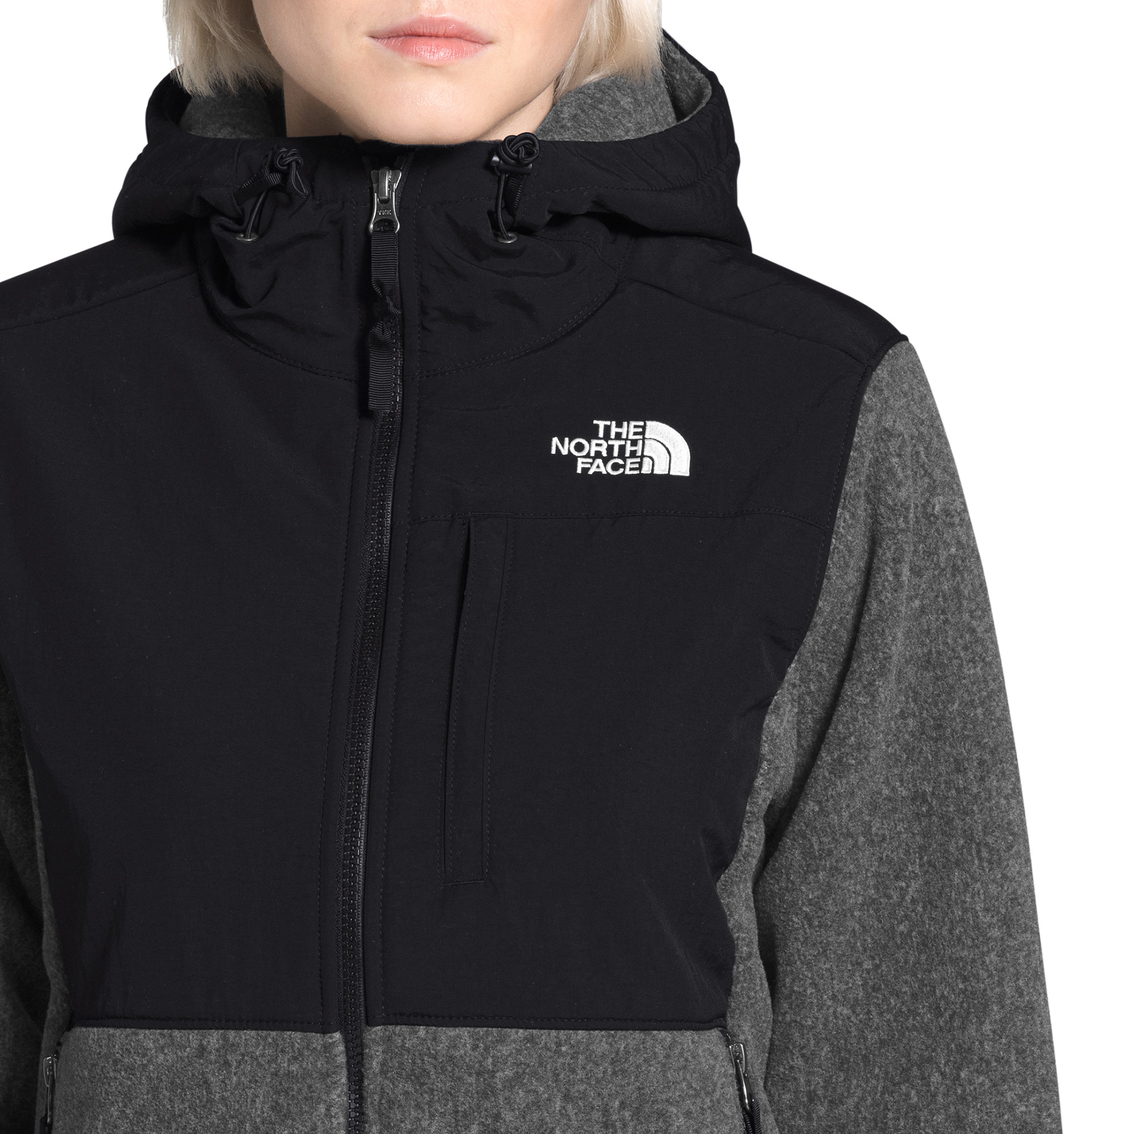 The North Face Denali 2 Hoodie | Hoodies & Sweatshirts | Mother's Day